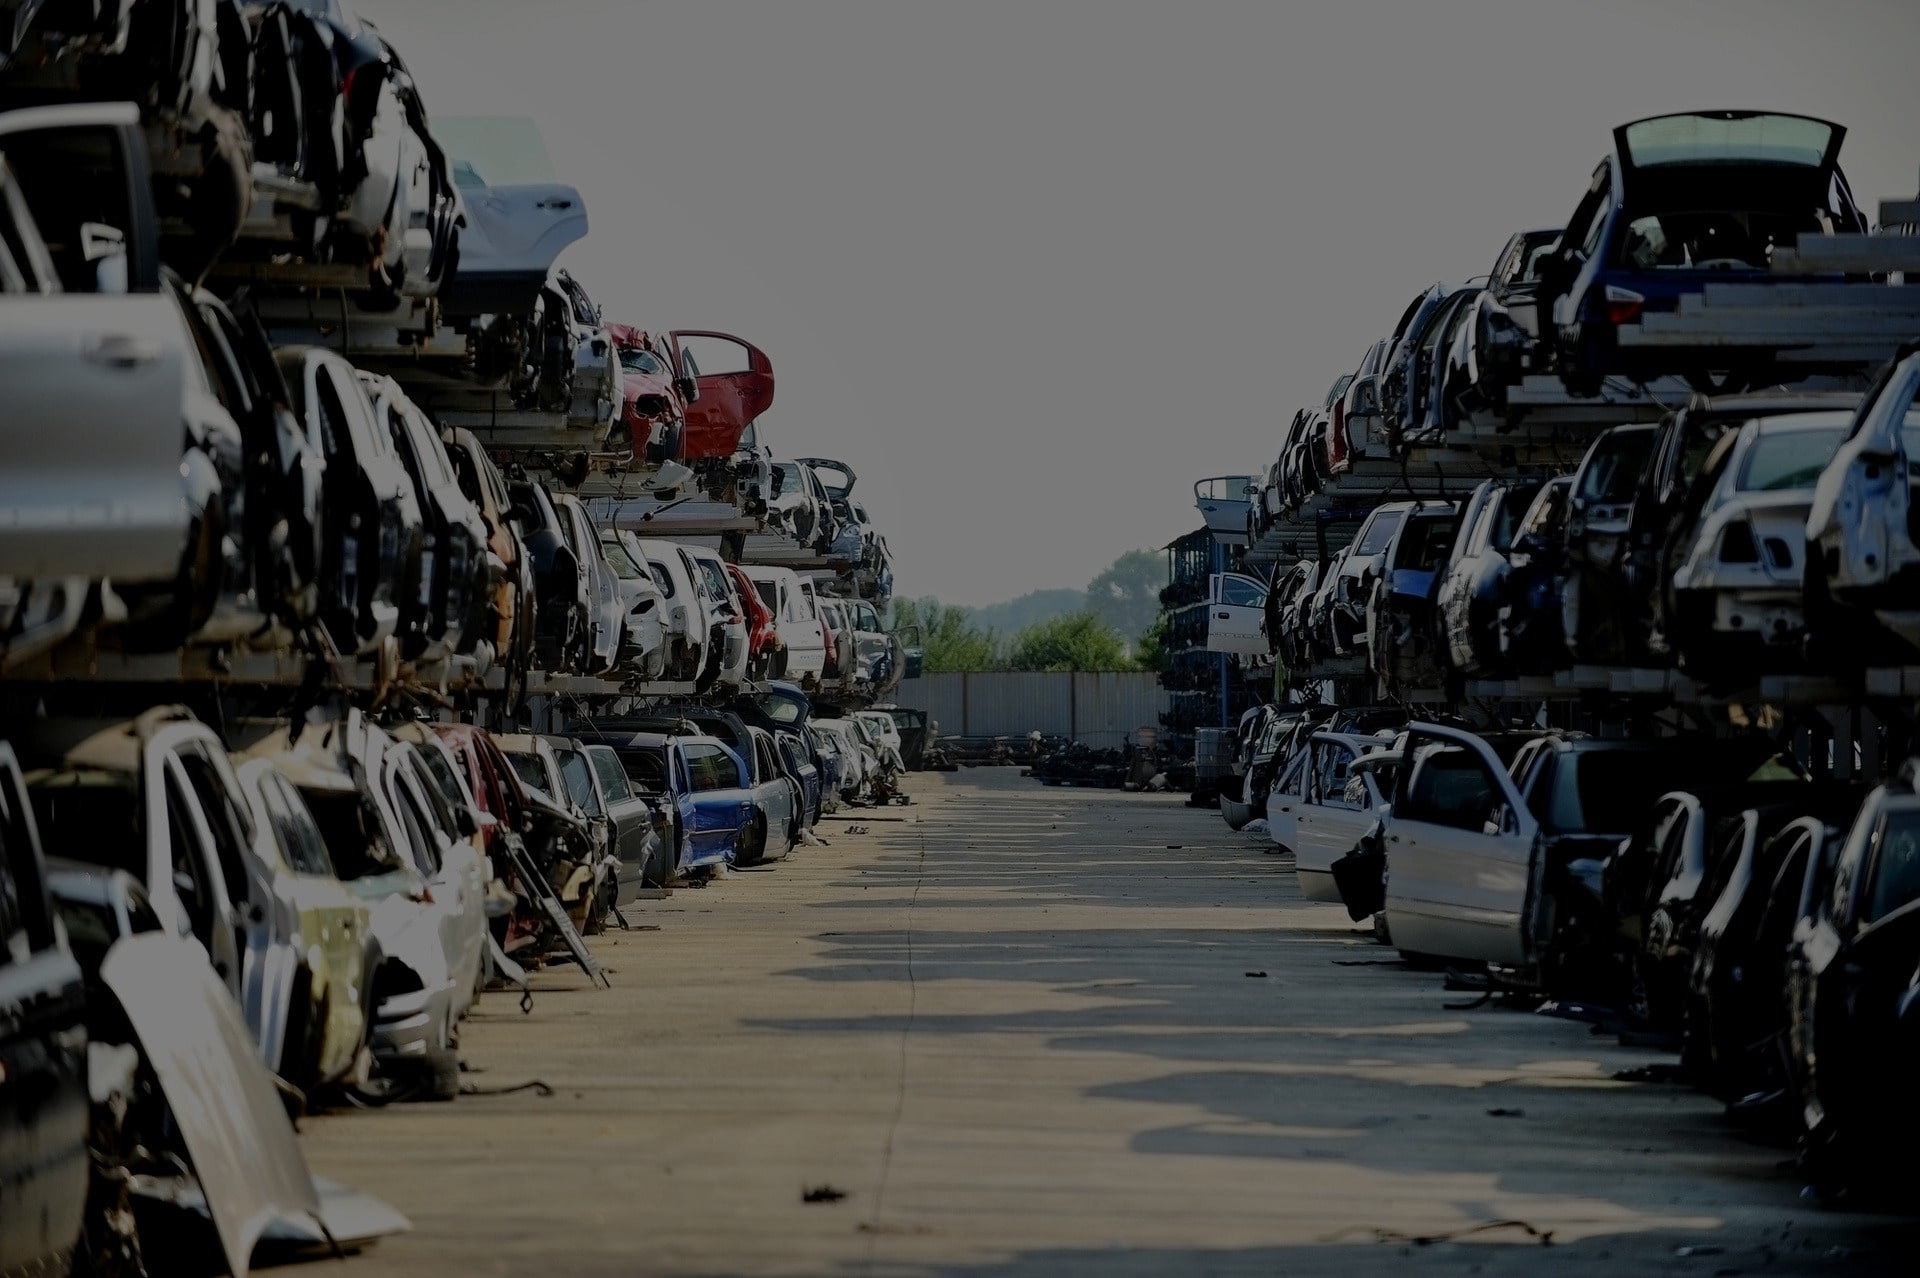 Removal of Junk Vehicles, Motorcycles, and Boats in Florida